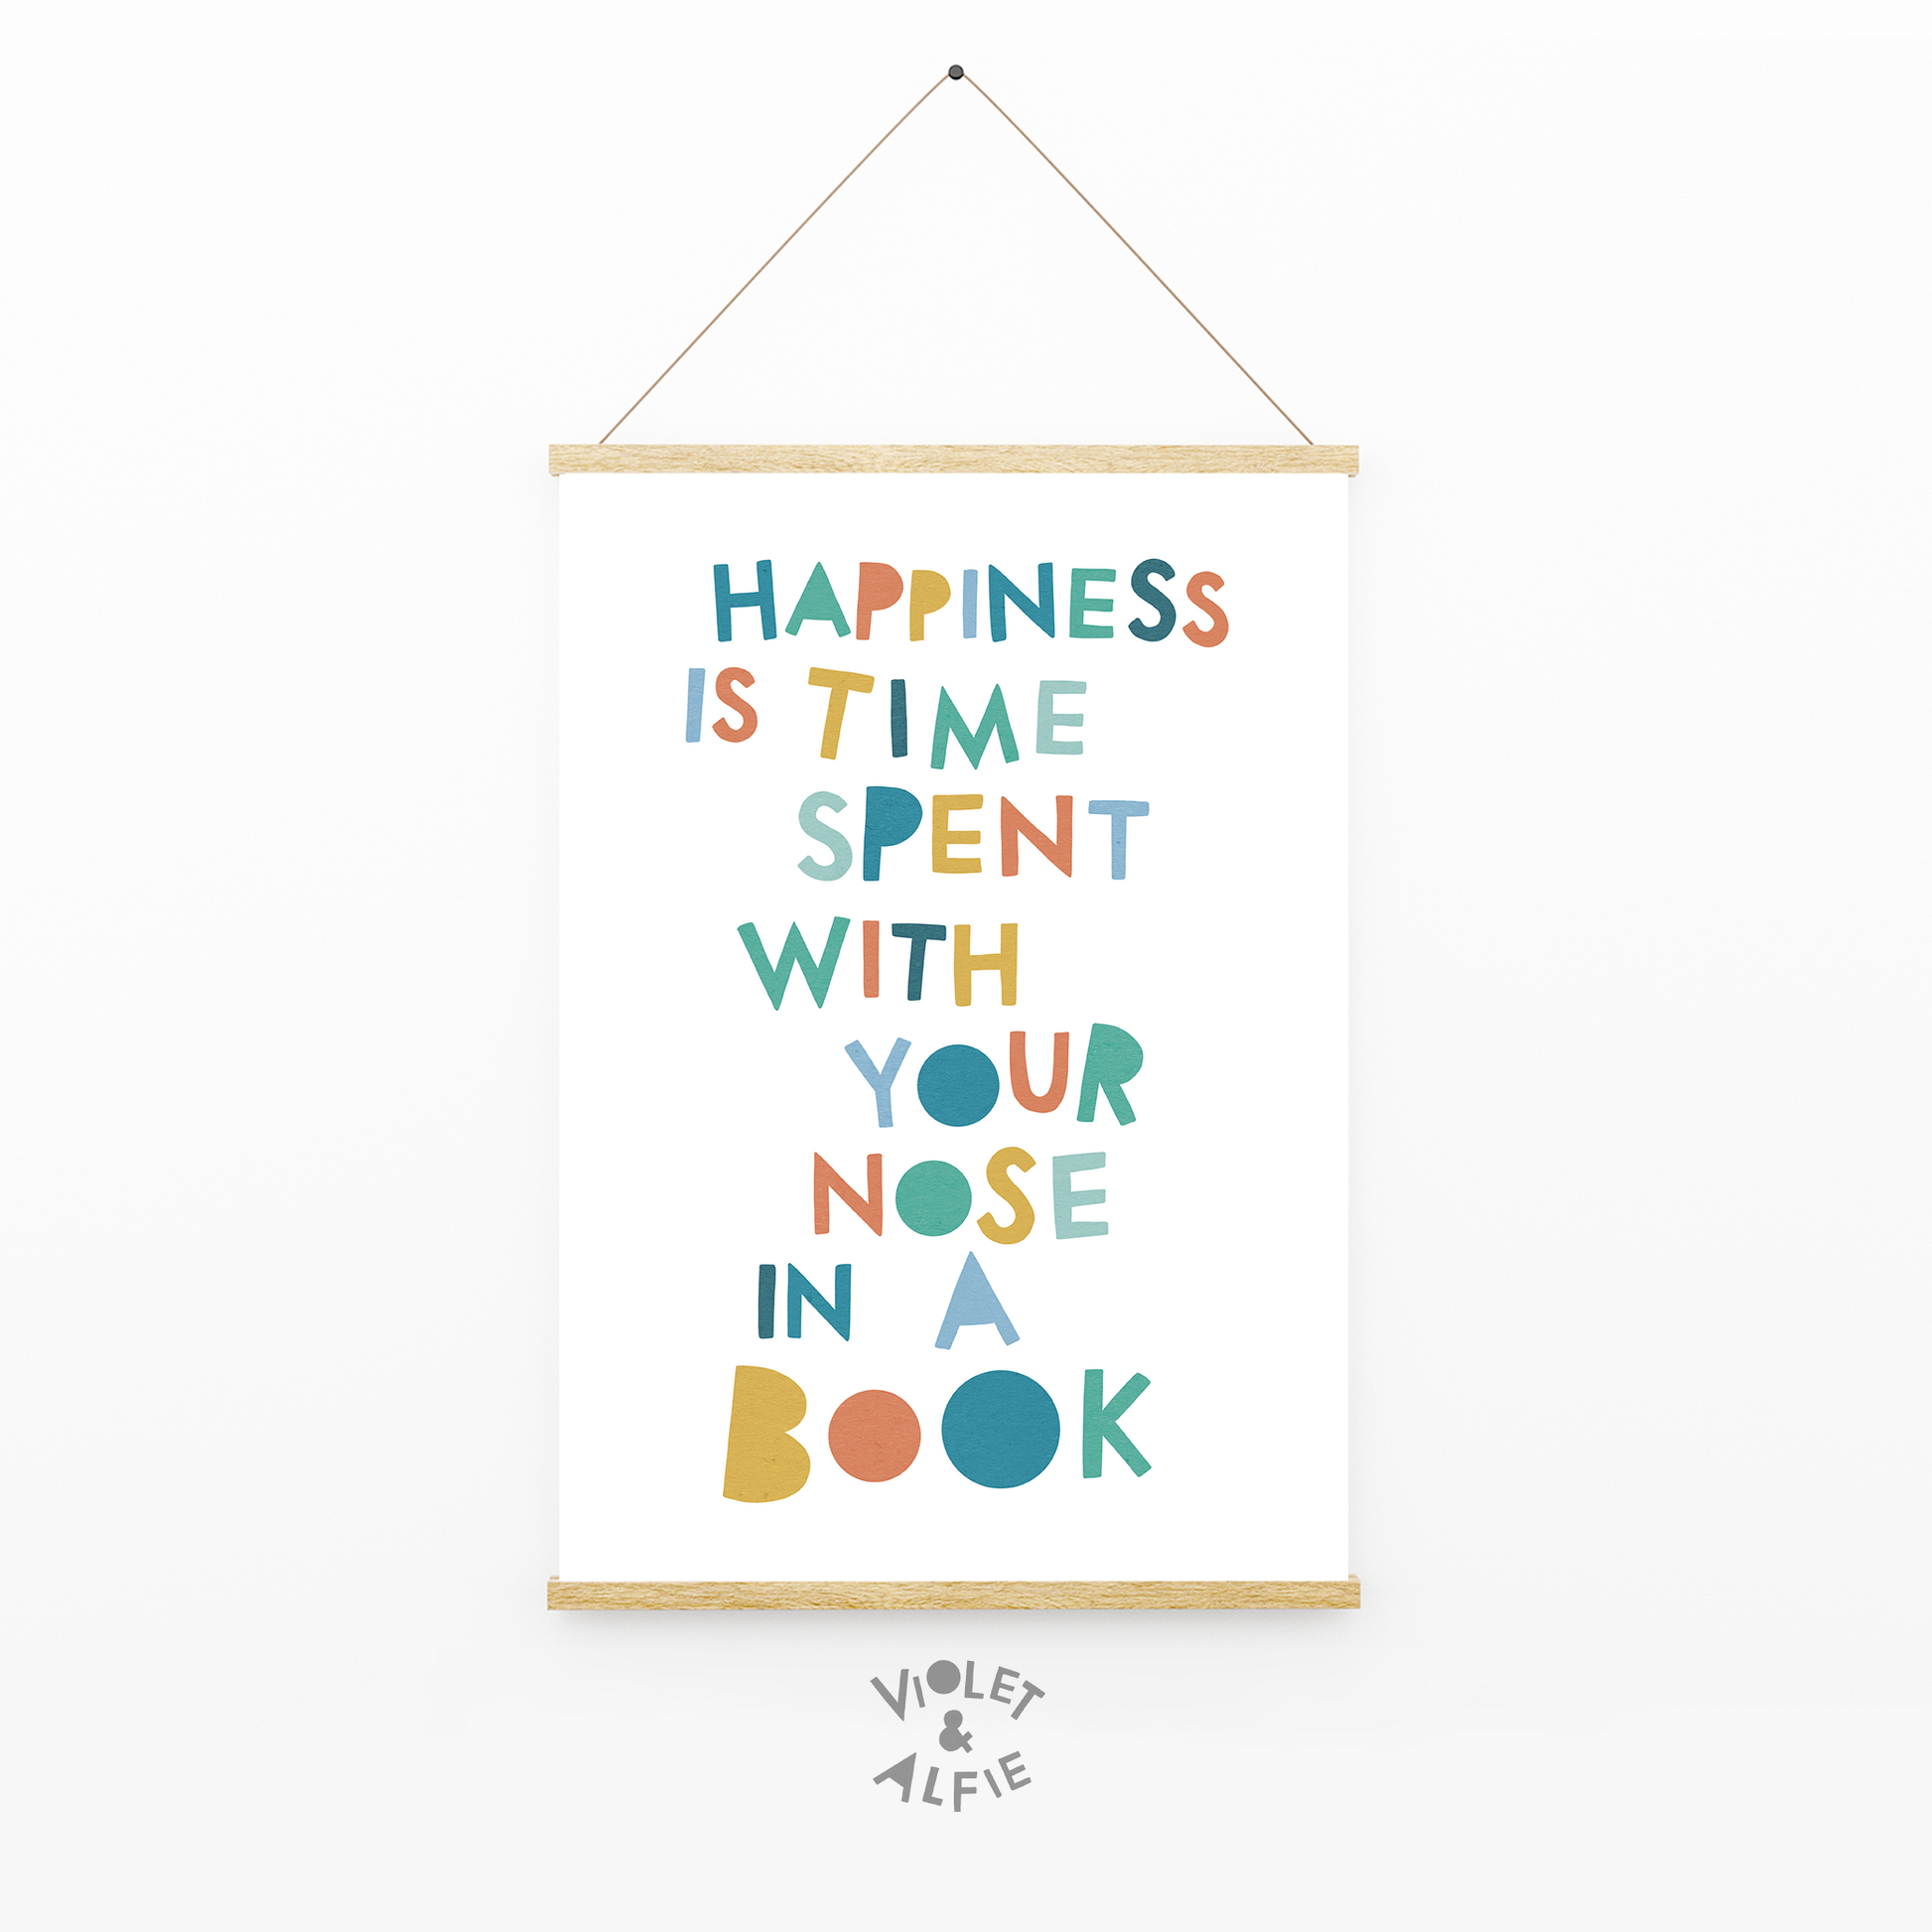 Book Nook print  Book Nook Decor  happiness is time spent with your nose in a book  bookish  Bookish Decor  Bookish Wall Art  bookish print  bookish present  bookish gift  bookish gifts uk  bookworm print